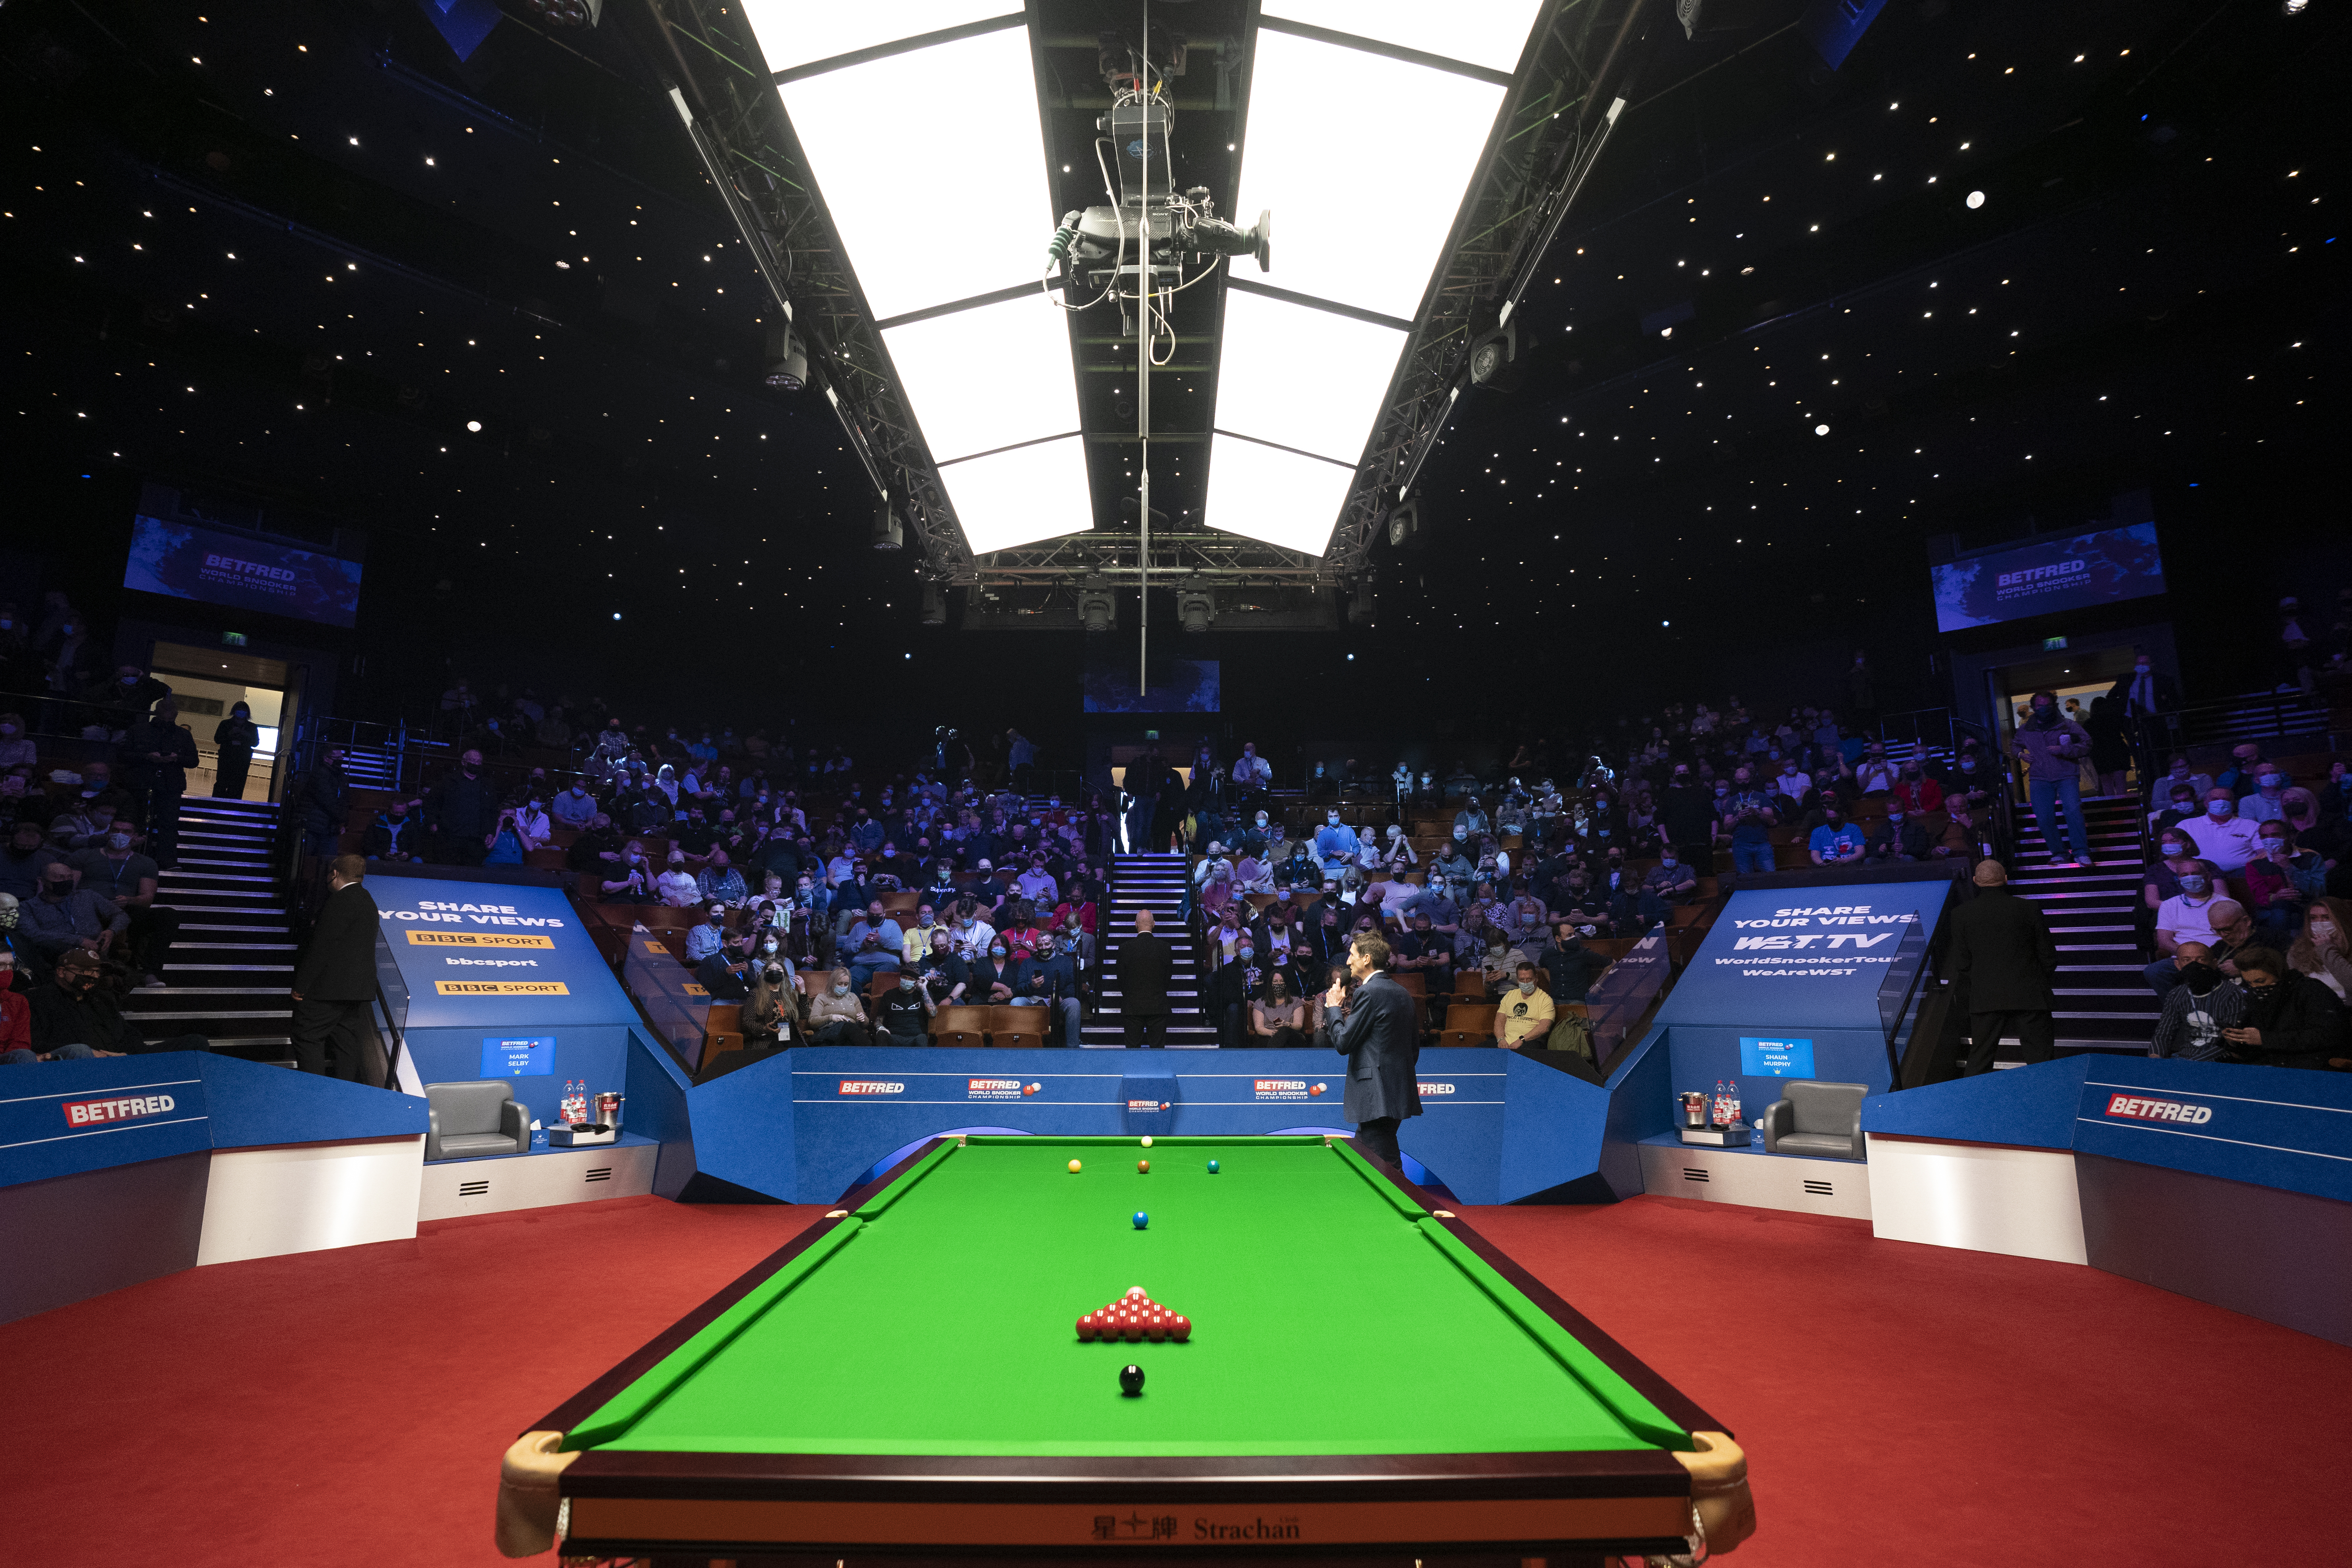 World Snooker Championship qualifying results tournament draw